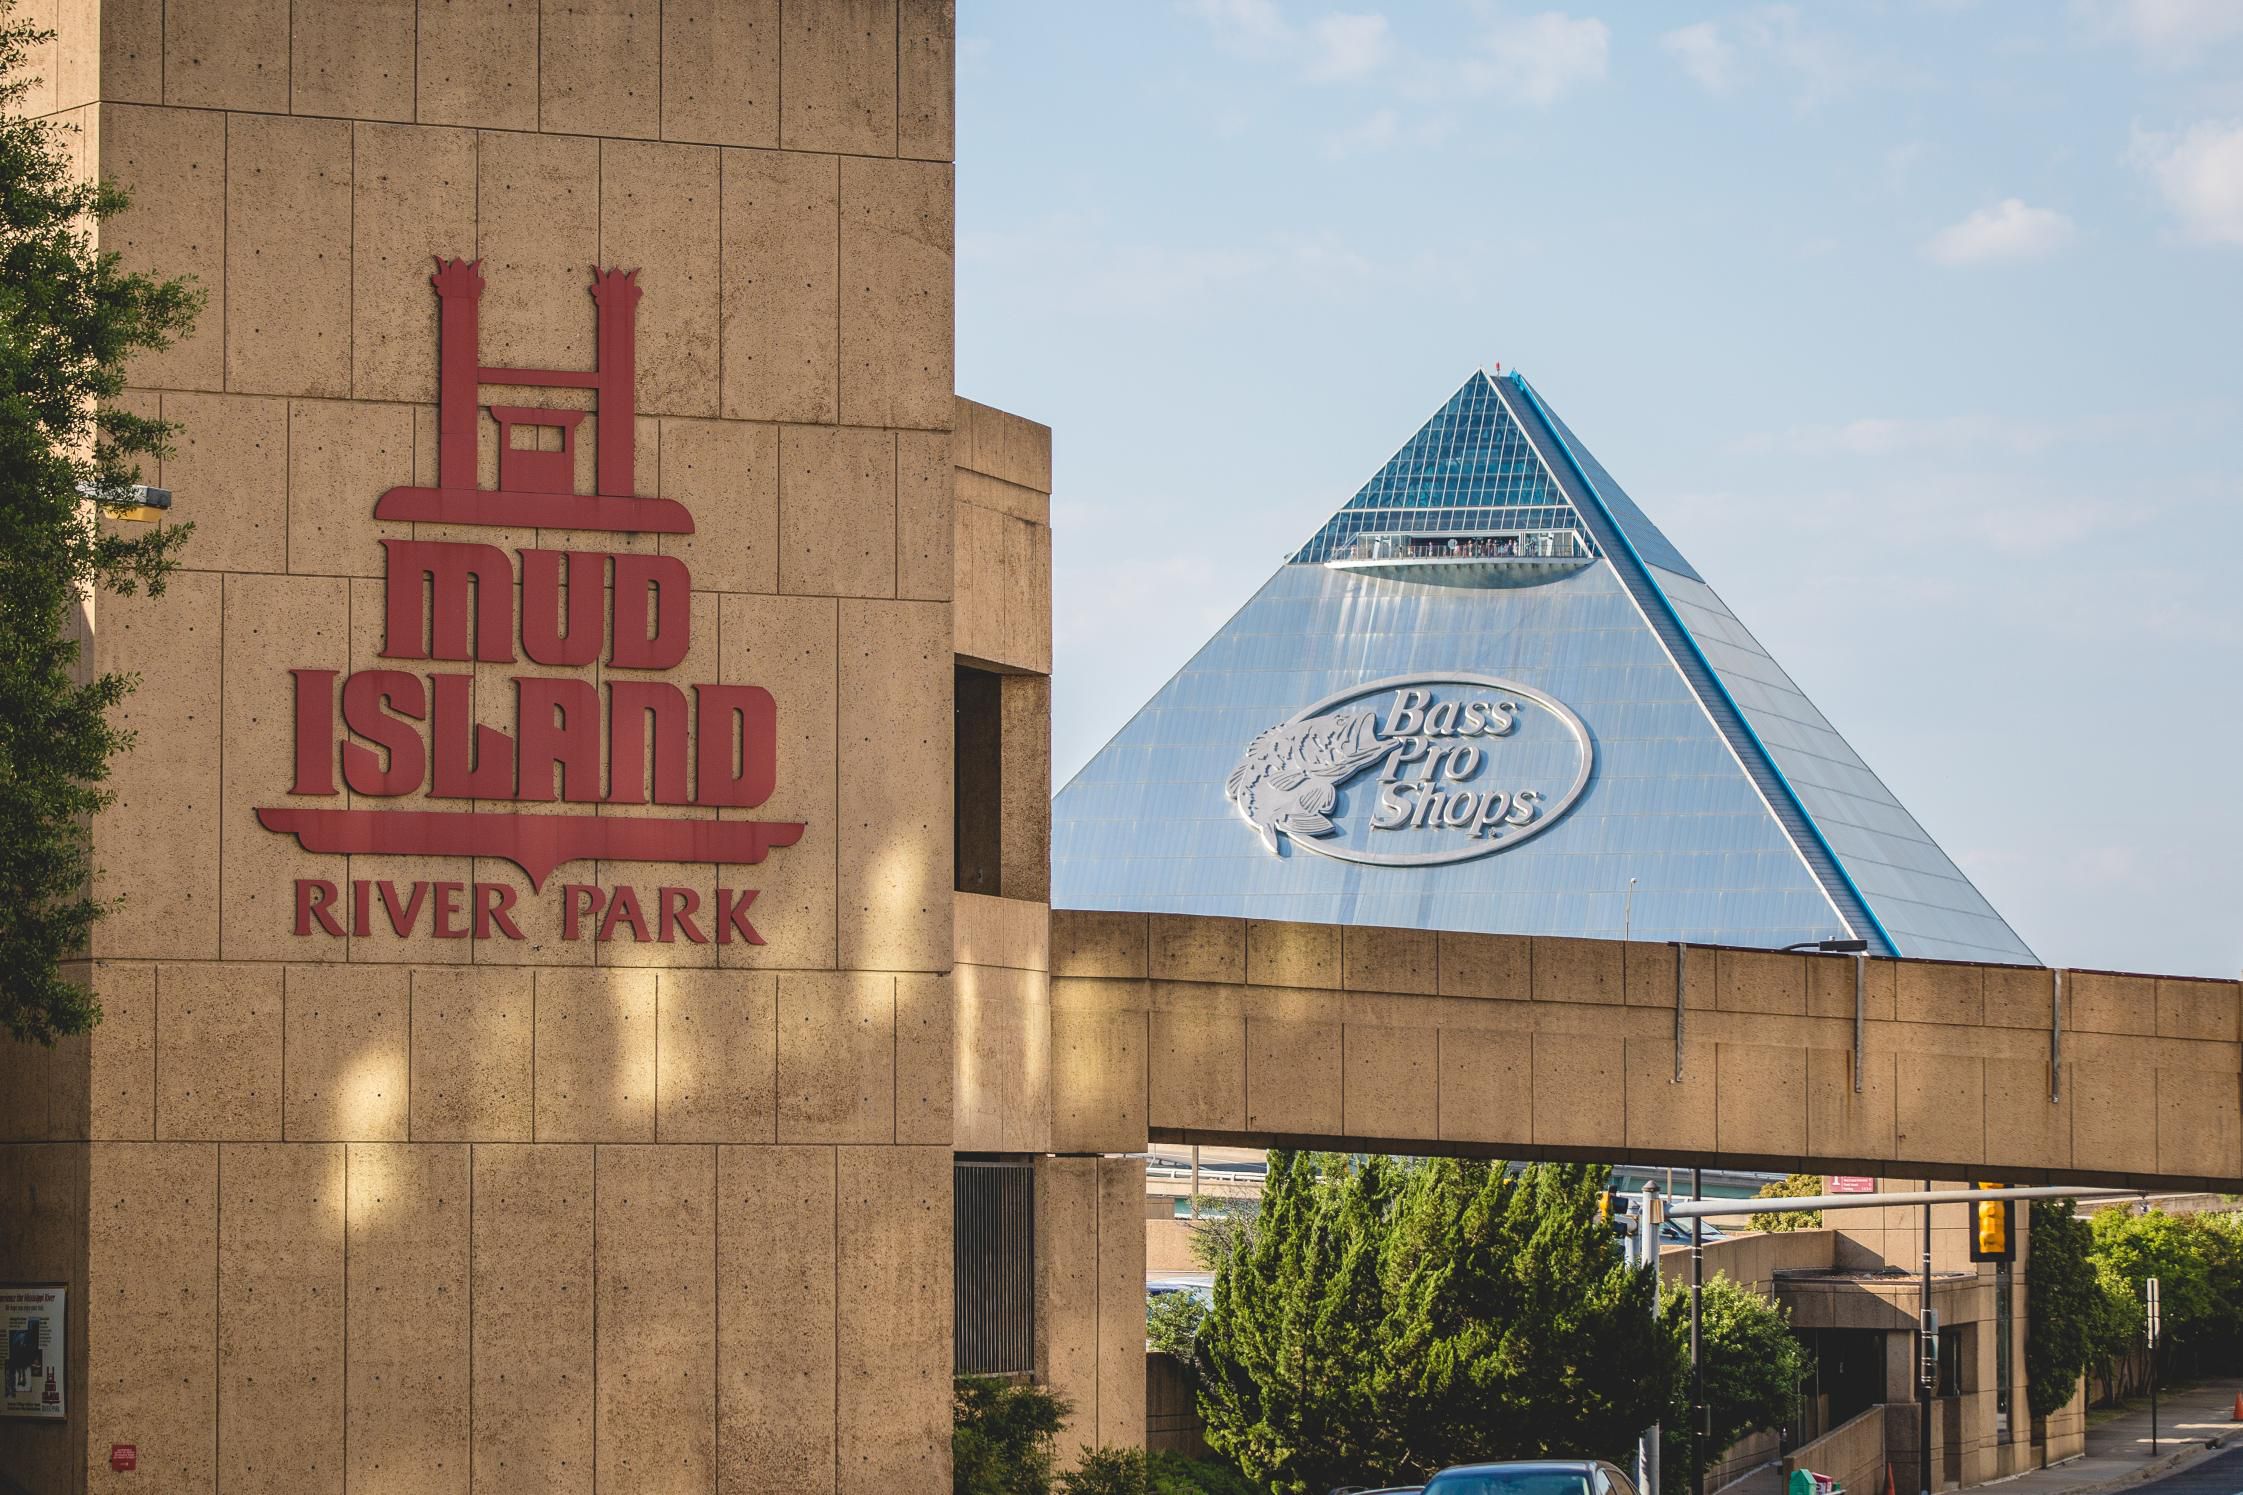 Spend the day at Mud Island River Park and Bass Pro shop